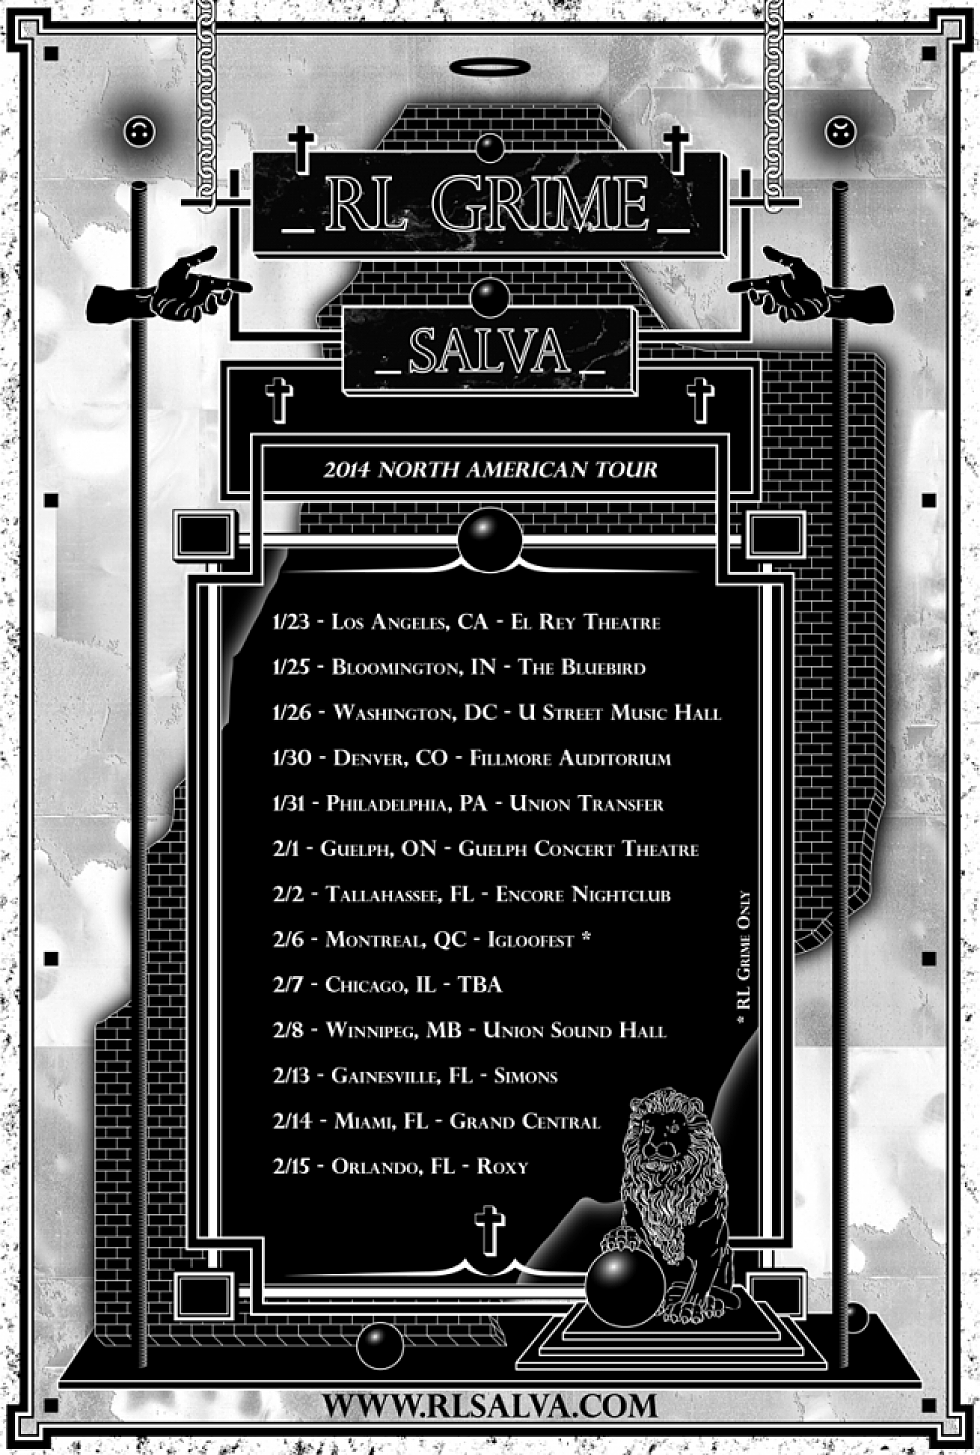 Rl Grime and Salva kick off 2014 right with their upcoming tour